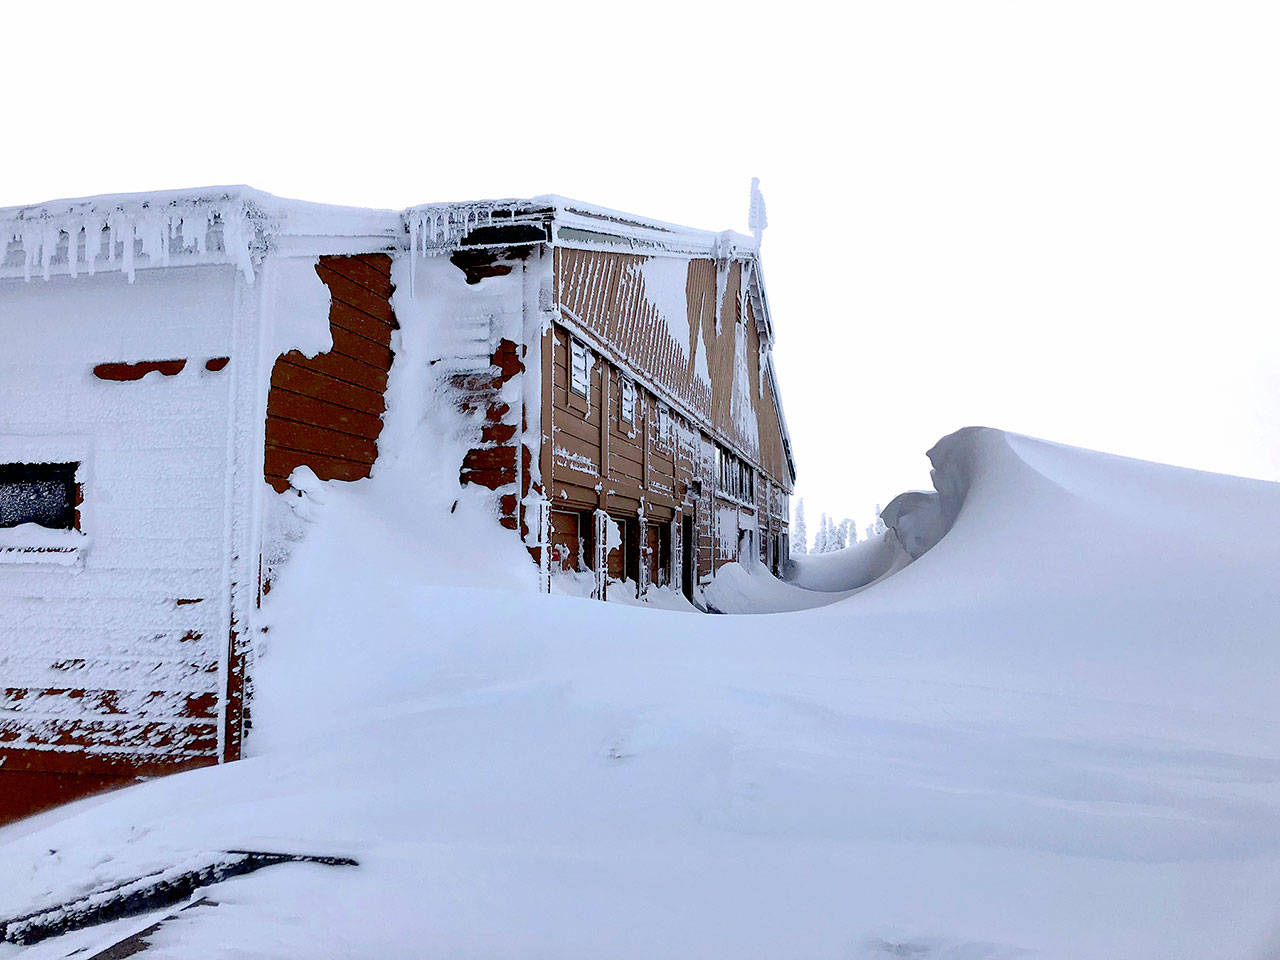 Fourteen-foot snow drifts were sculpted by high wind near the visitor center at Hurricane Ridge in the photograph taken Friday. (Sarah Crosier/National Park Service)